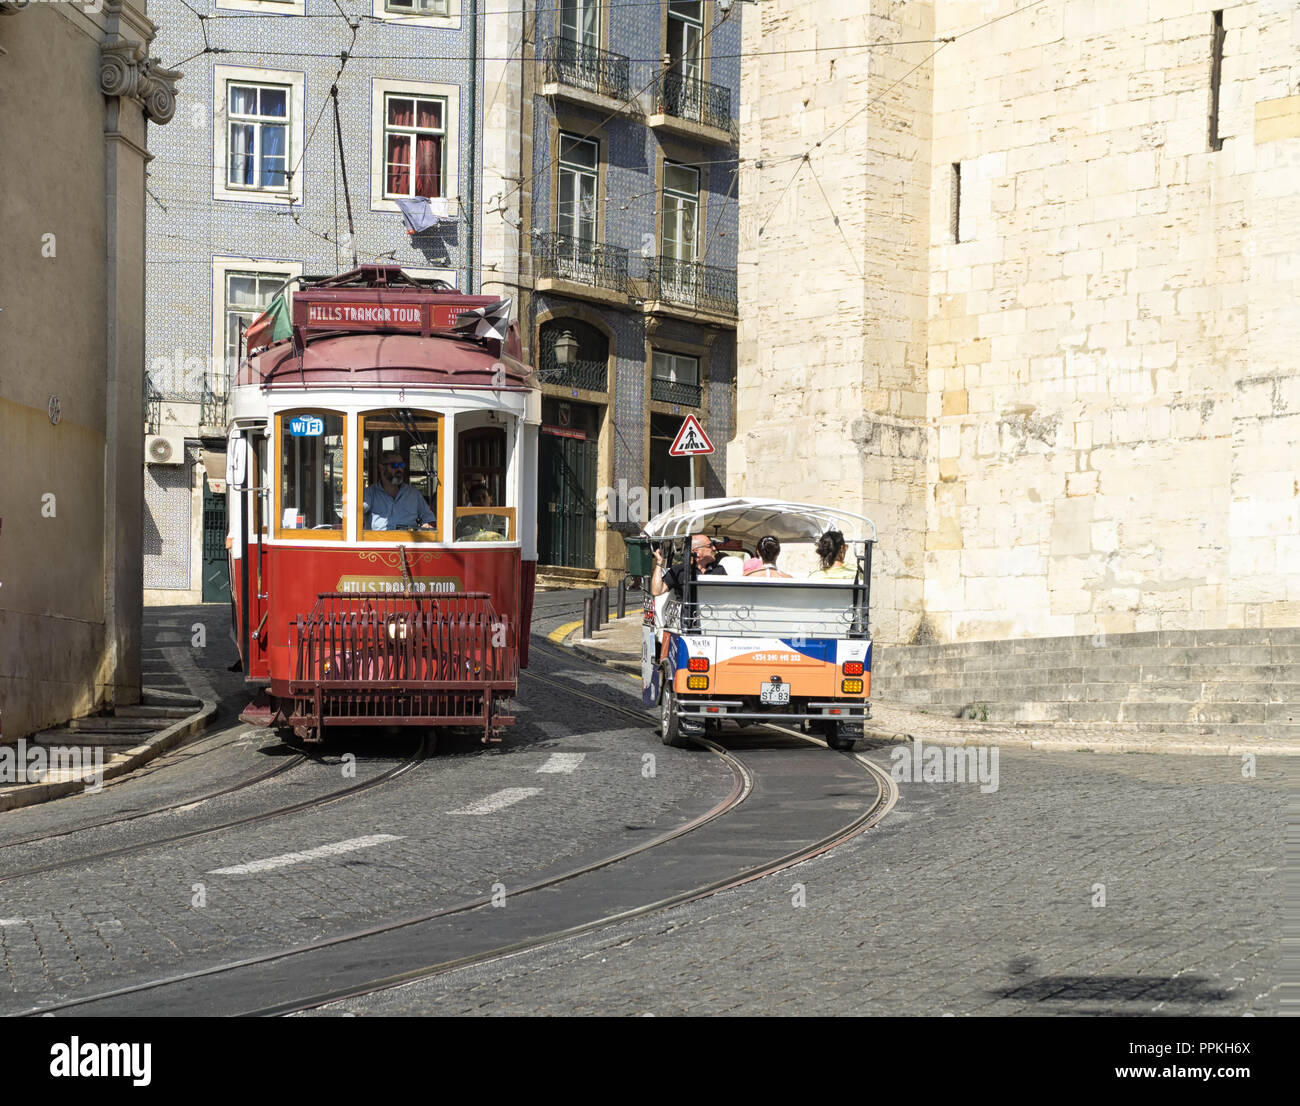 LISBON, PORTUGAL - August 31, 2018: Tourists visit  the Lisbon with the red tram and tuk-tuk. Alfama next to the Se Cathedral Stock Photo